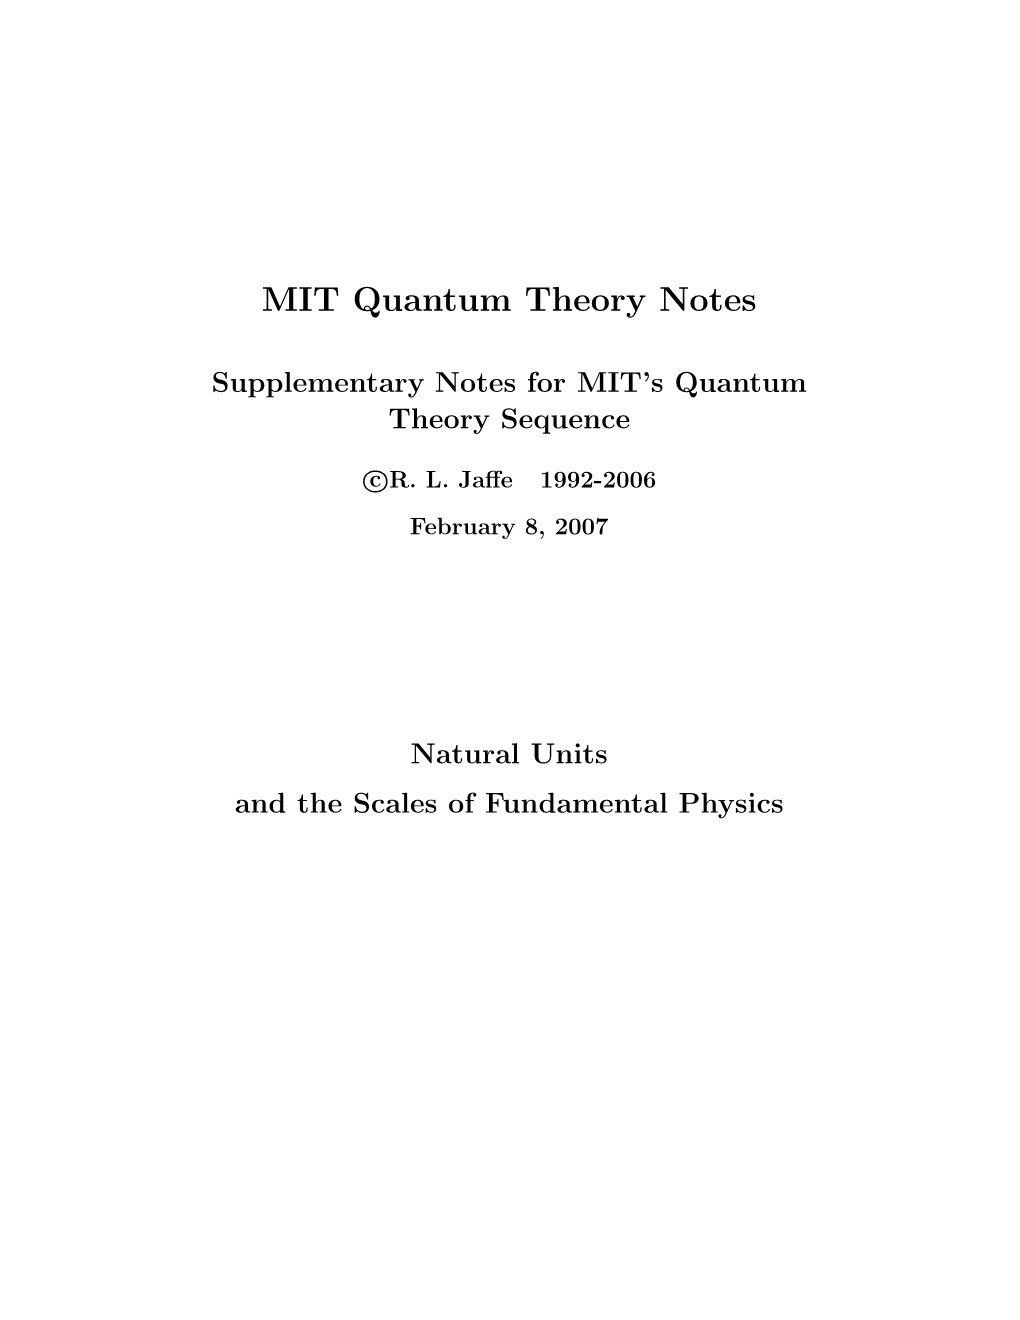 Natural Units and the Scales of Fundamental Physics C R